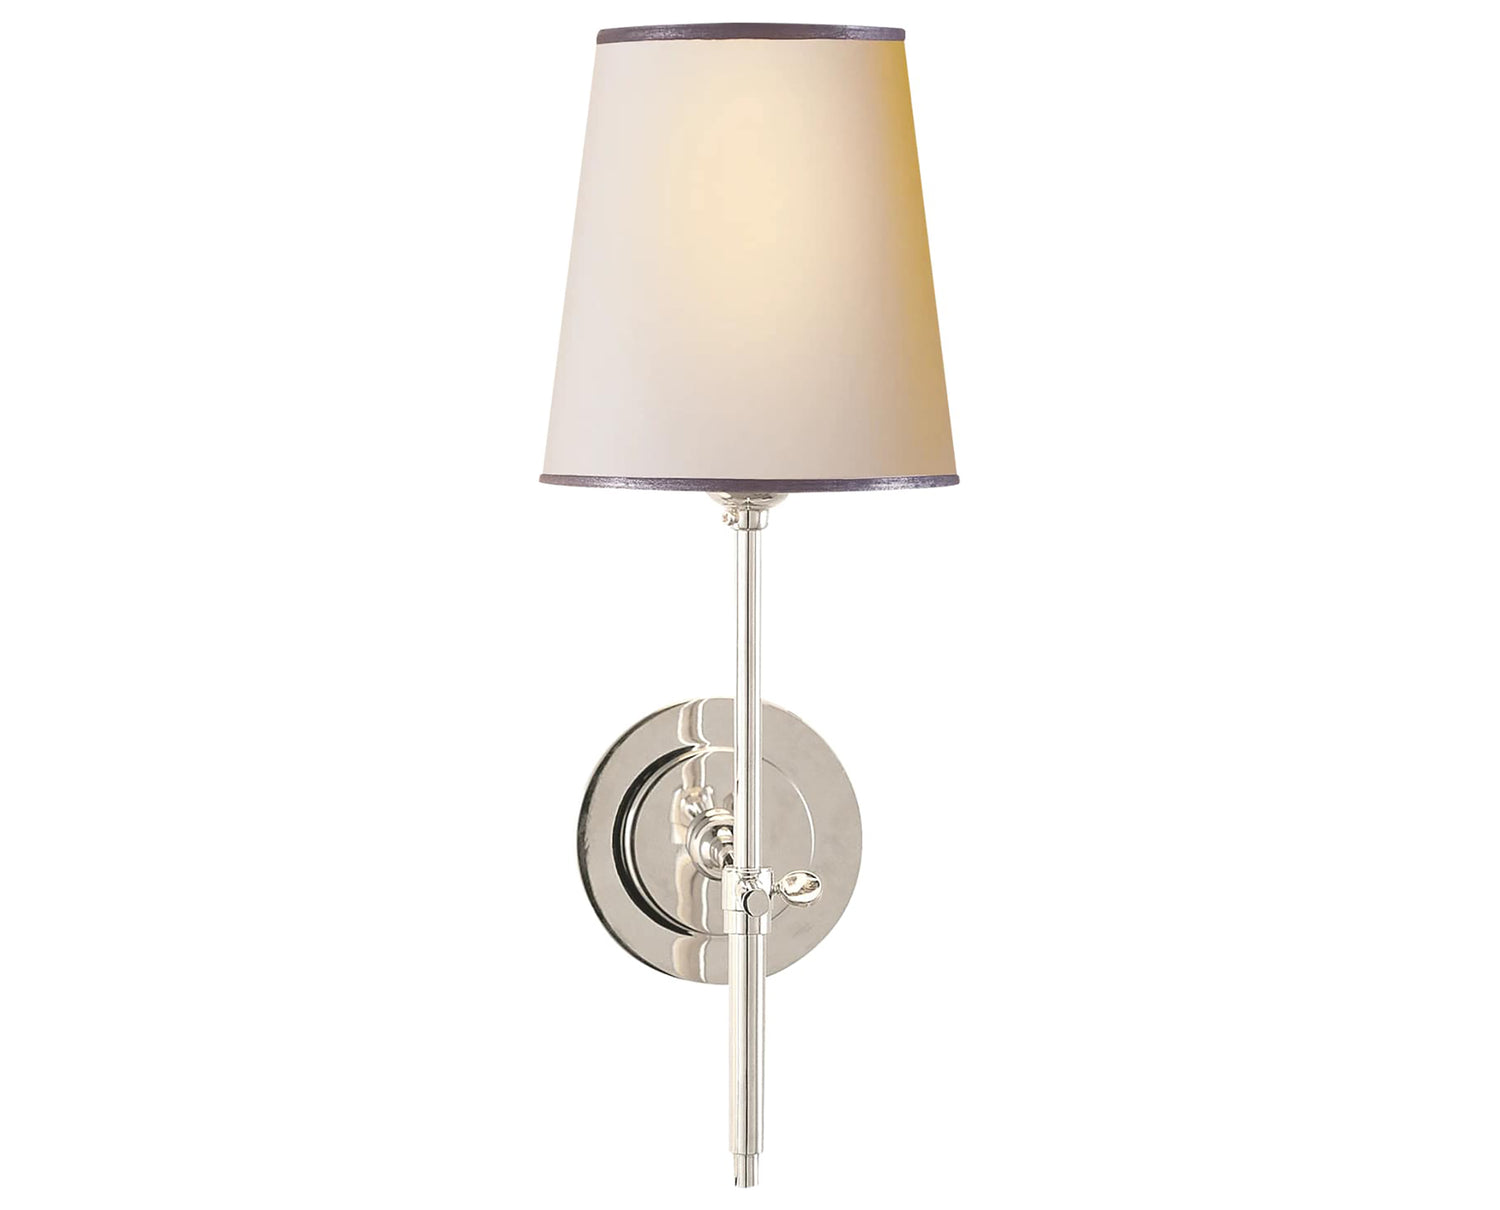 Polished Nickel and Natural Paper with Silver Trim | Bryant Sconce - Natural Paper Shade | Valley Ridge Furniture